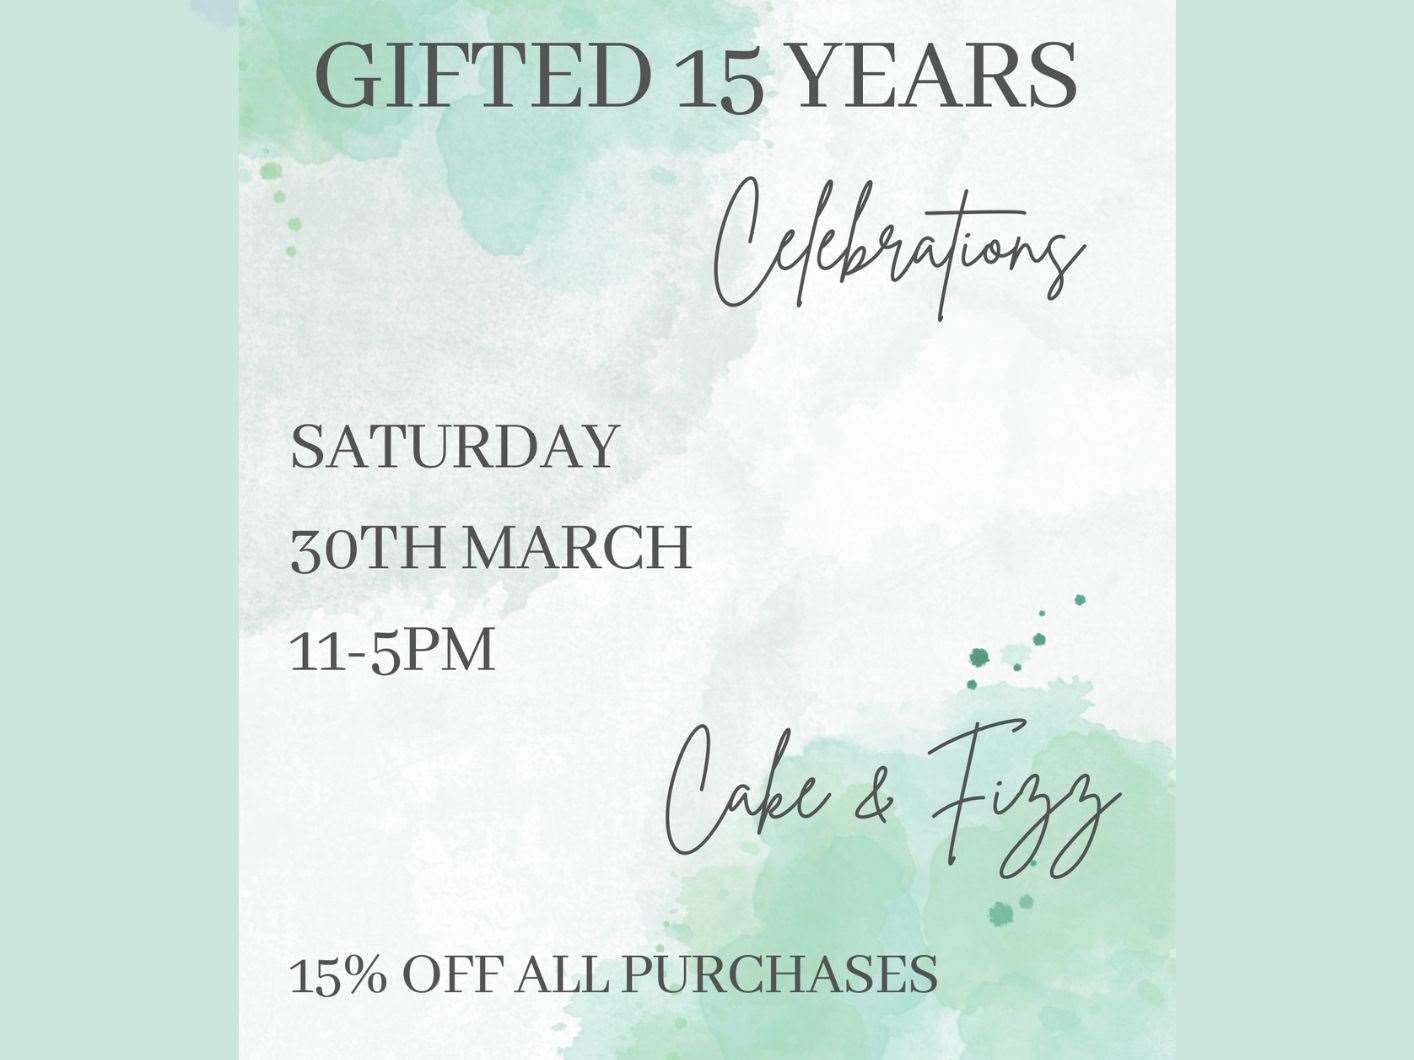 Gifted Helmsdale celebrates its 15th anniversary tomorrow.